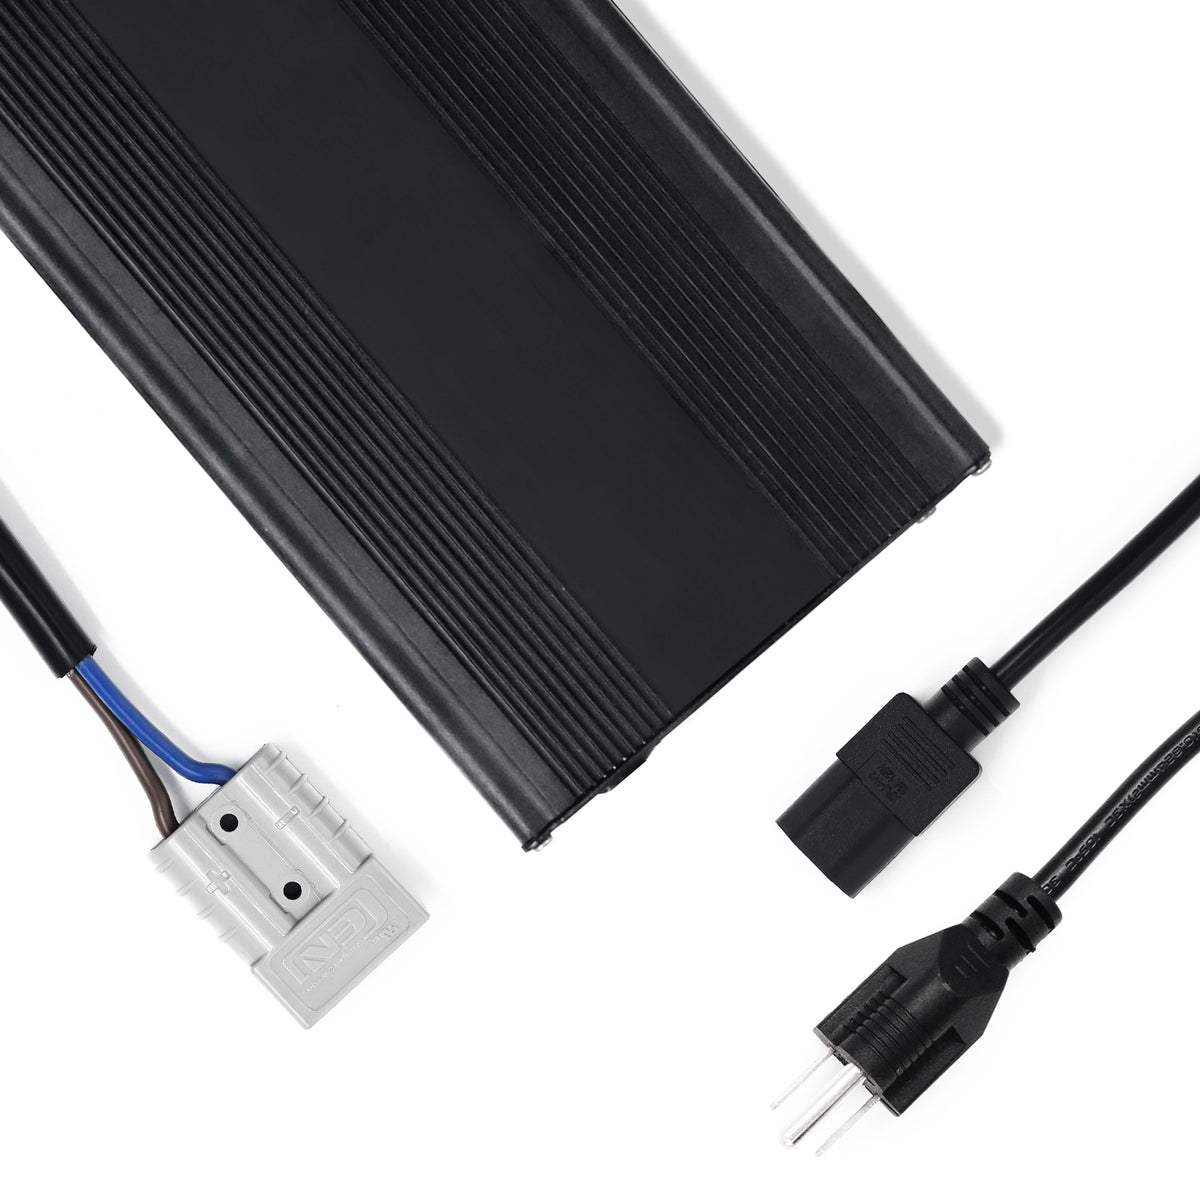 POWEREPUBLIC T1200 & T2200 AC Adapter, Fast Charge